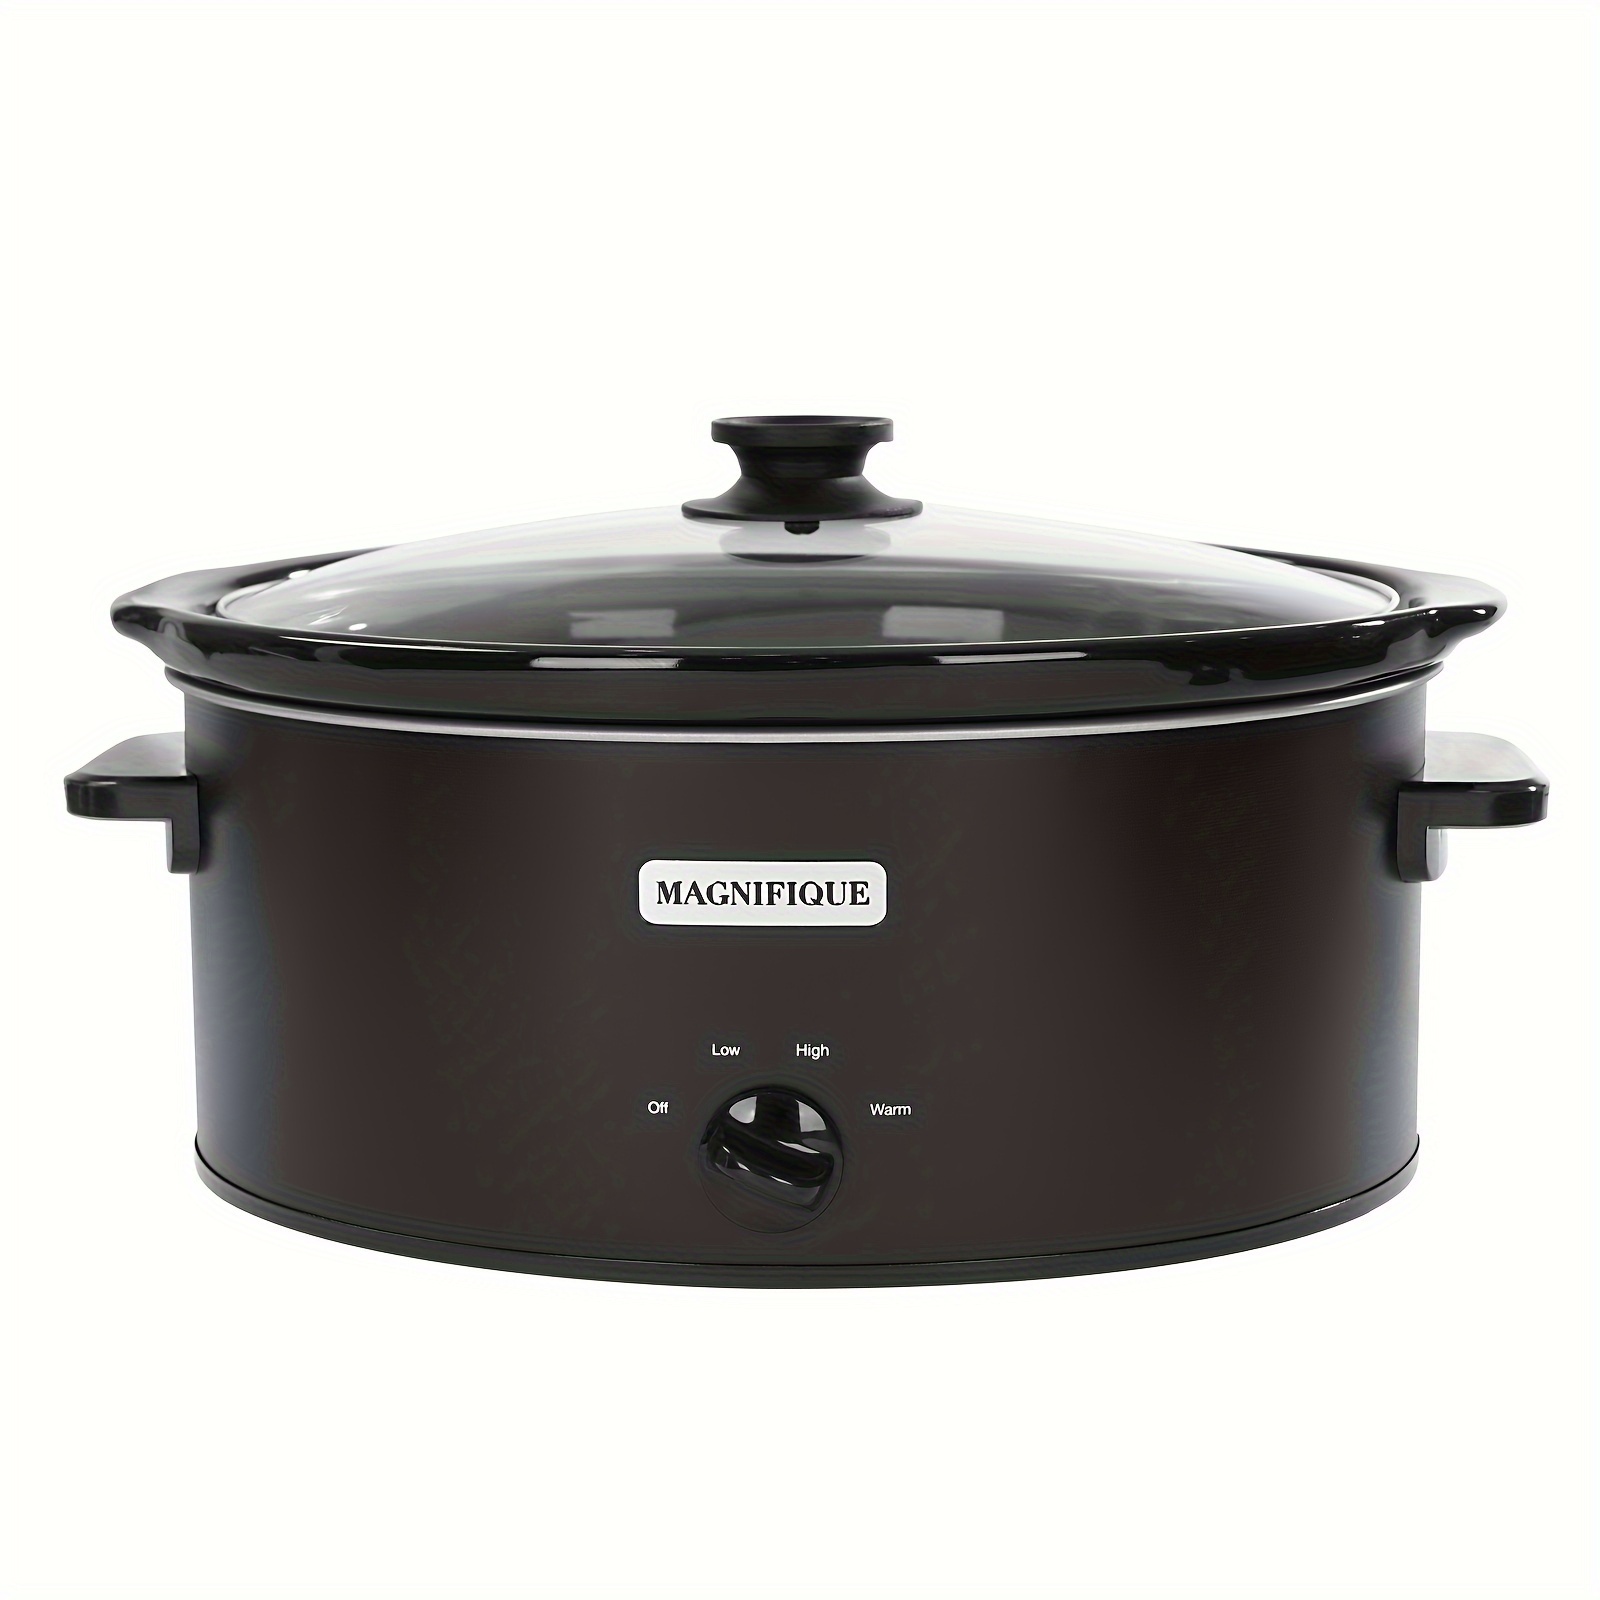 

1pc, Magnifique 6 Quart Black Slow Cooker, Oval Manual Food Warmer With 3 Cooking Settings, Glass Lid, Ceramic Pot, Kitchen Appliance For Family Dinners